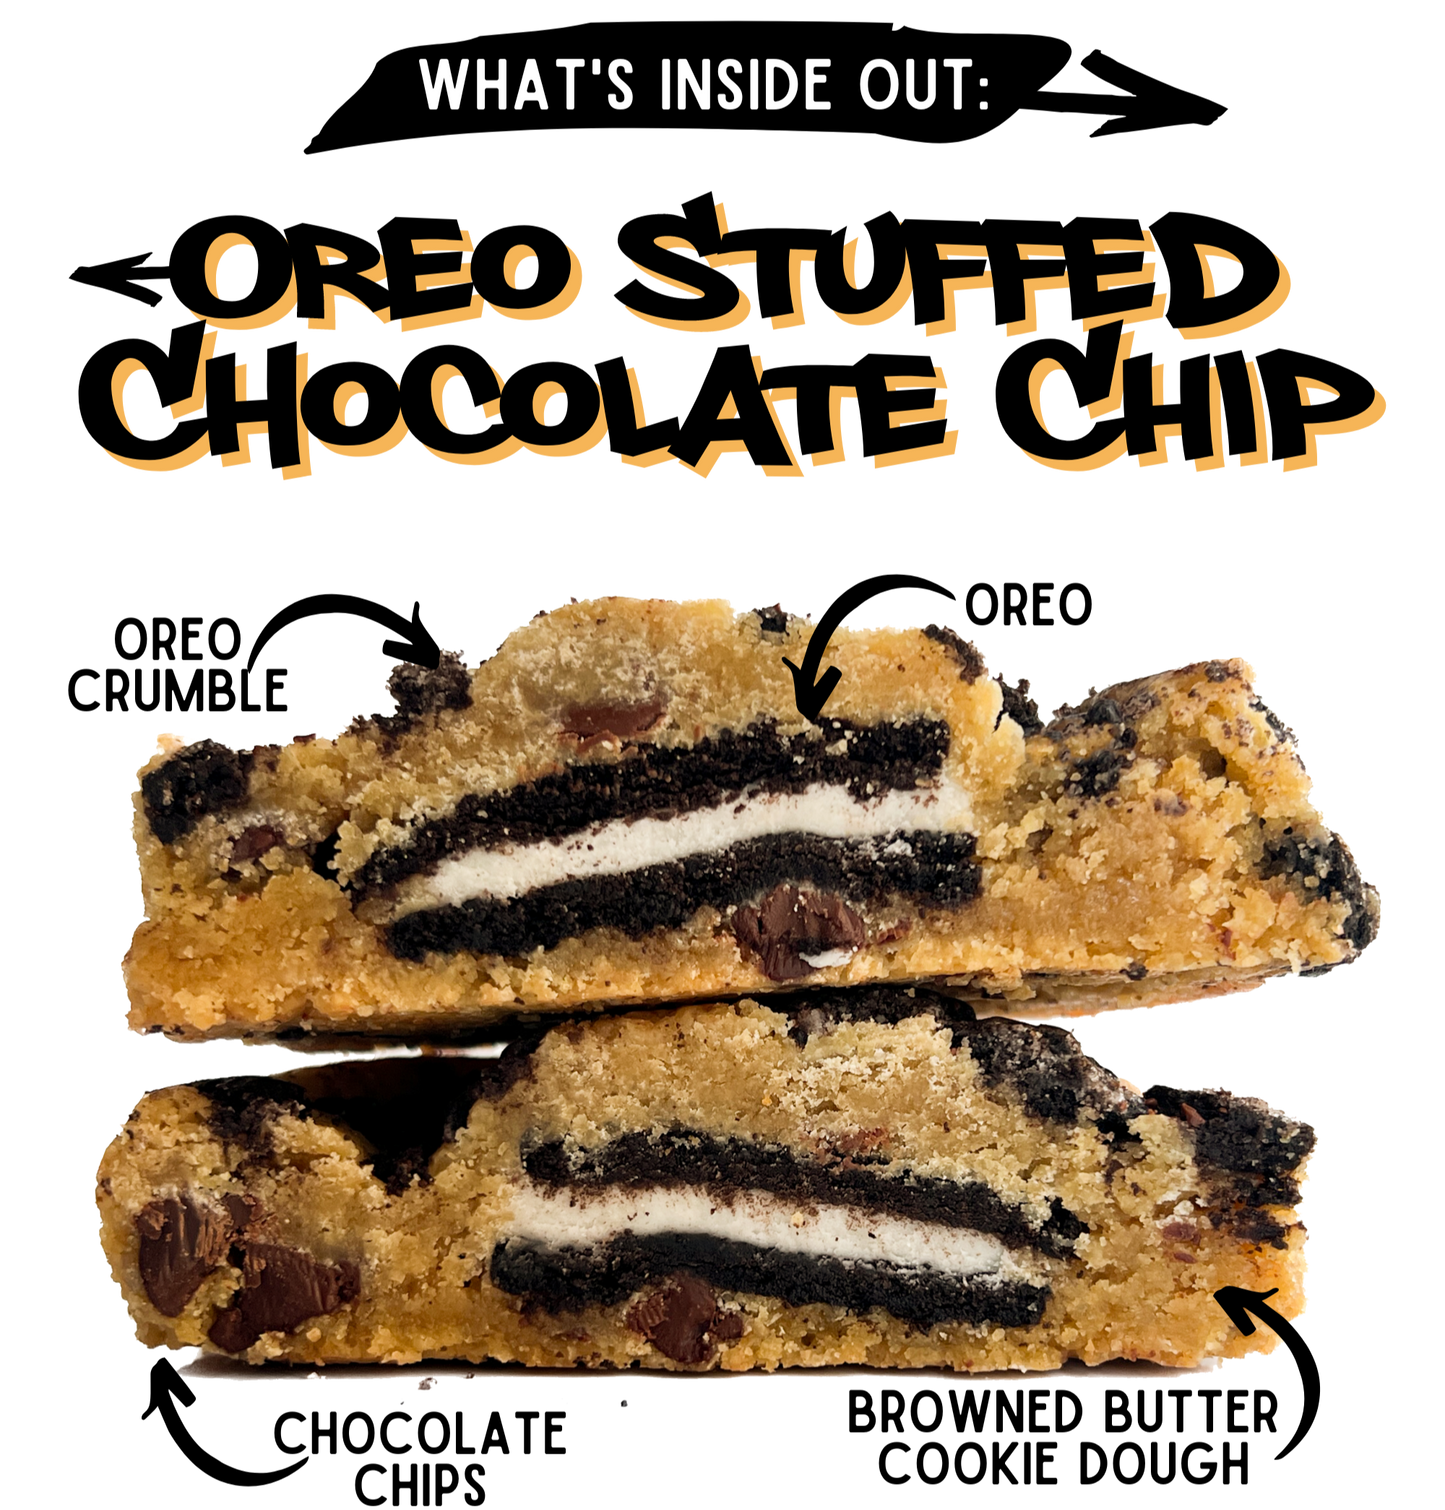 Inside Out Cookie oreo stuffed chocolate chip cookies